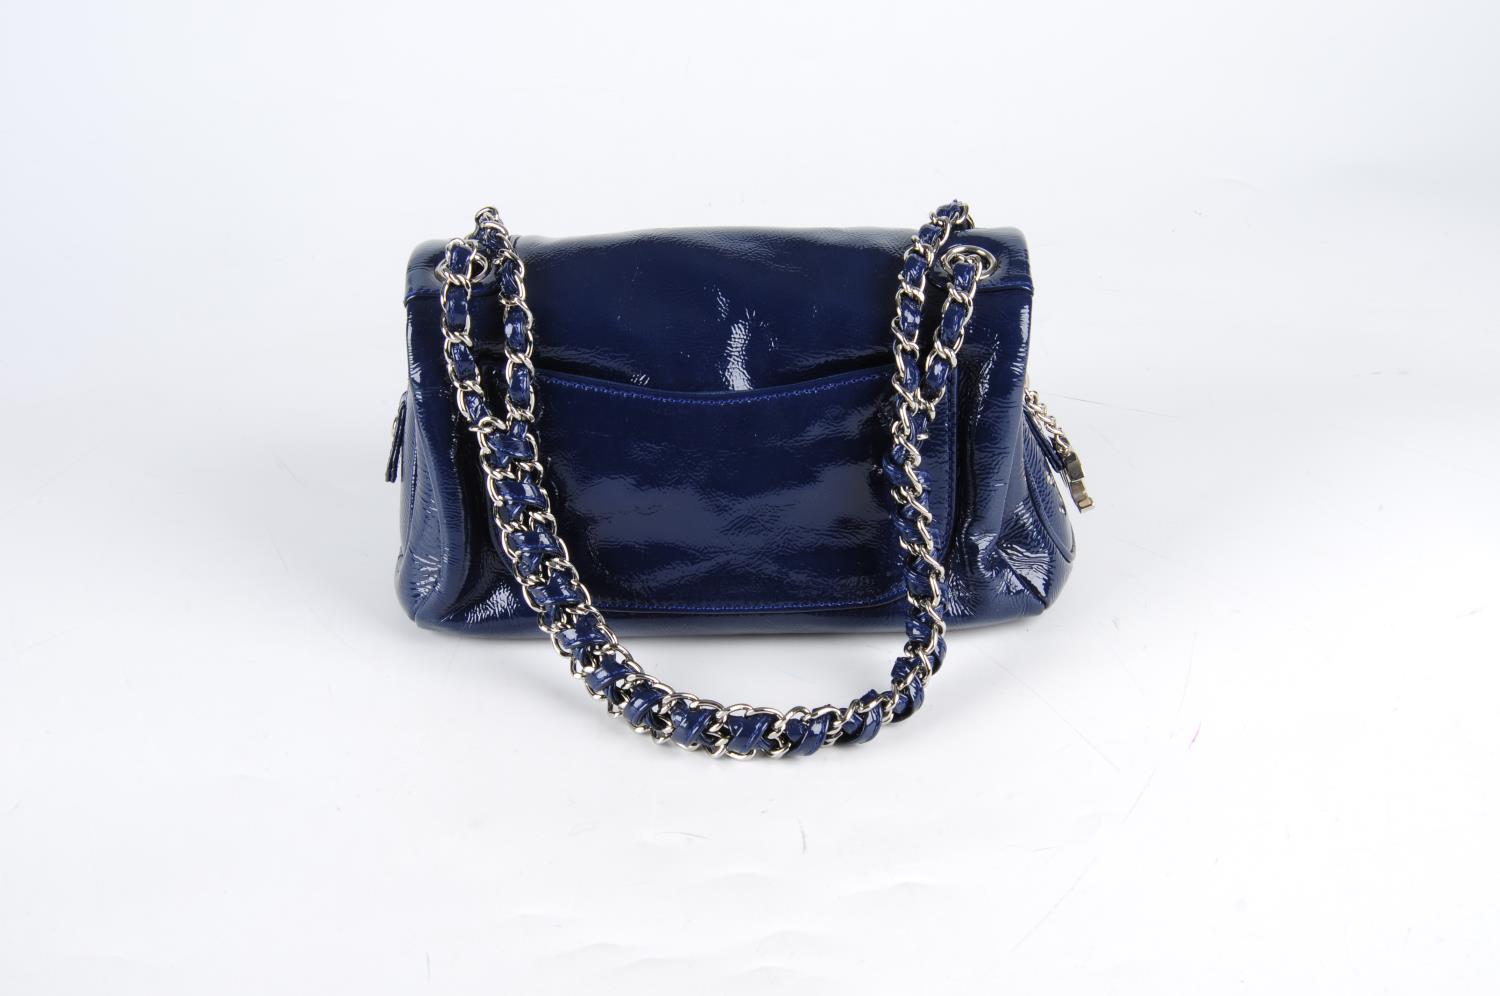 CHANEL - a small Luxe Ligne Flap handbag. - Image 2 of 4